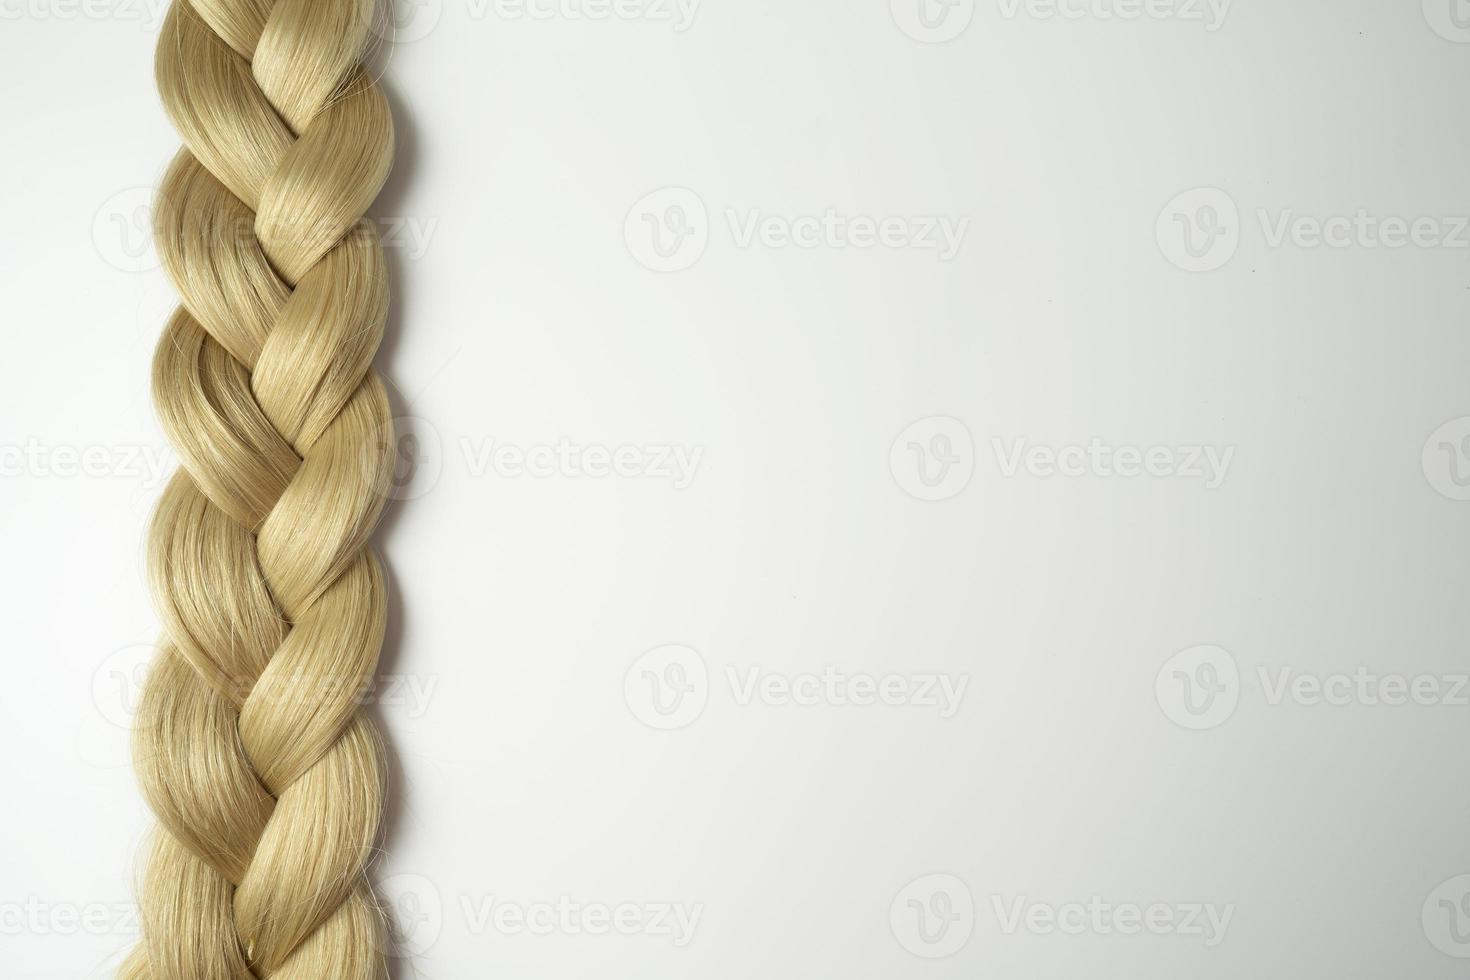 A strand of blonde hair lying on a white background photo